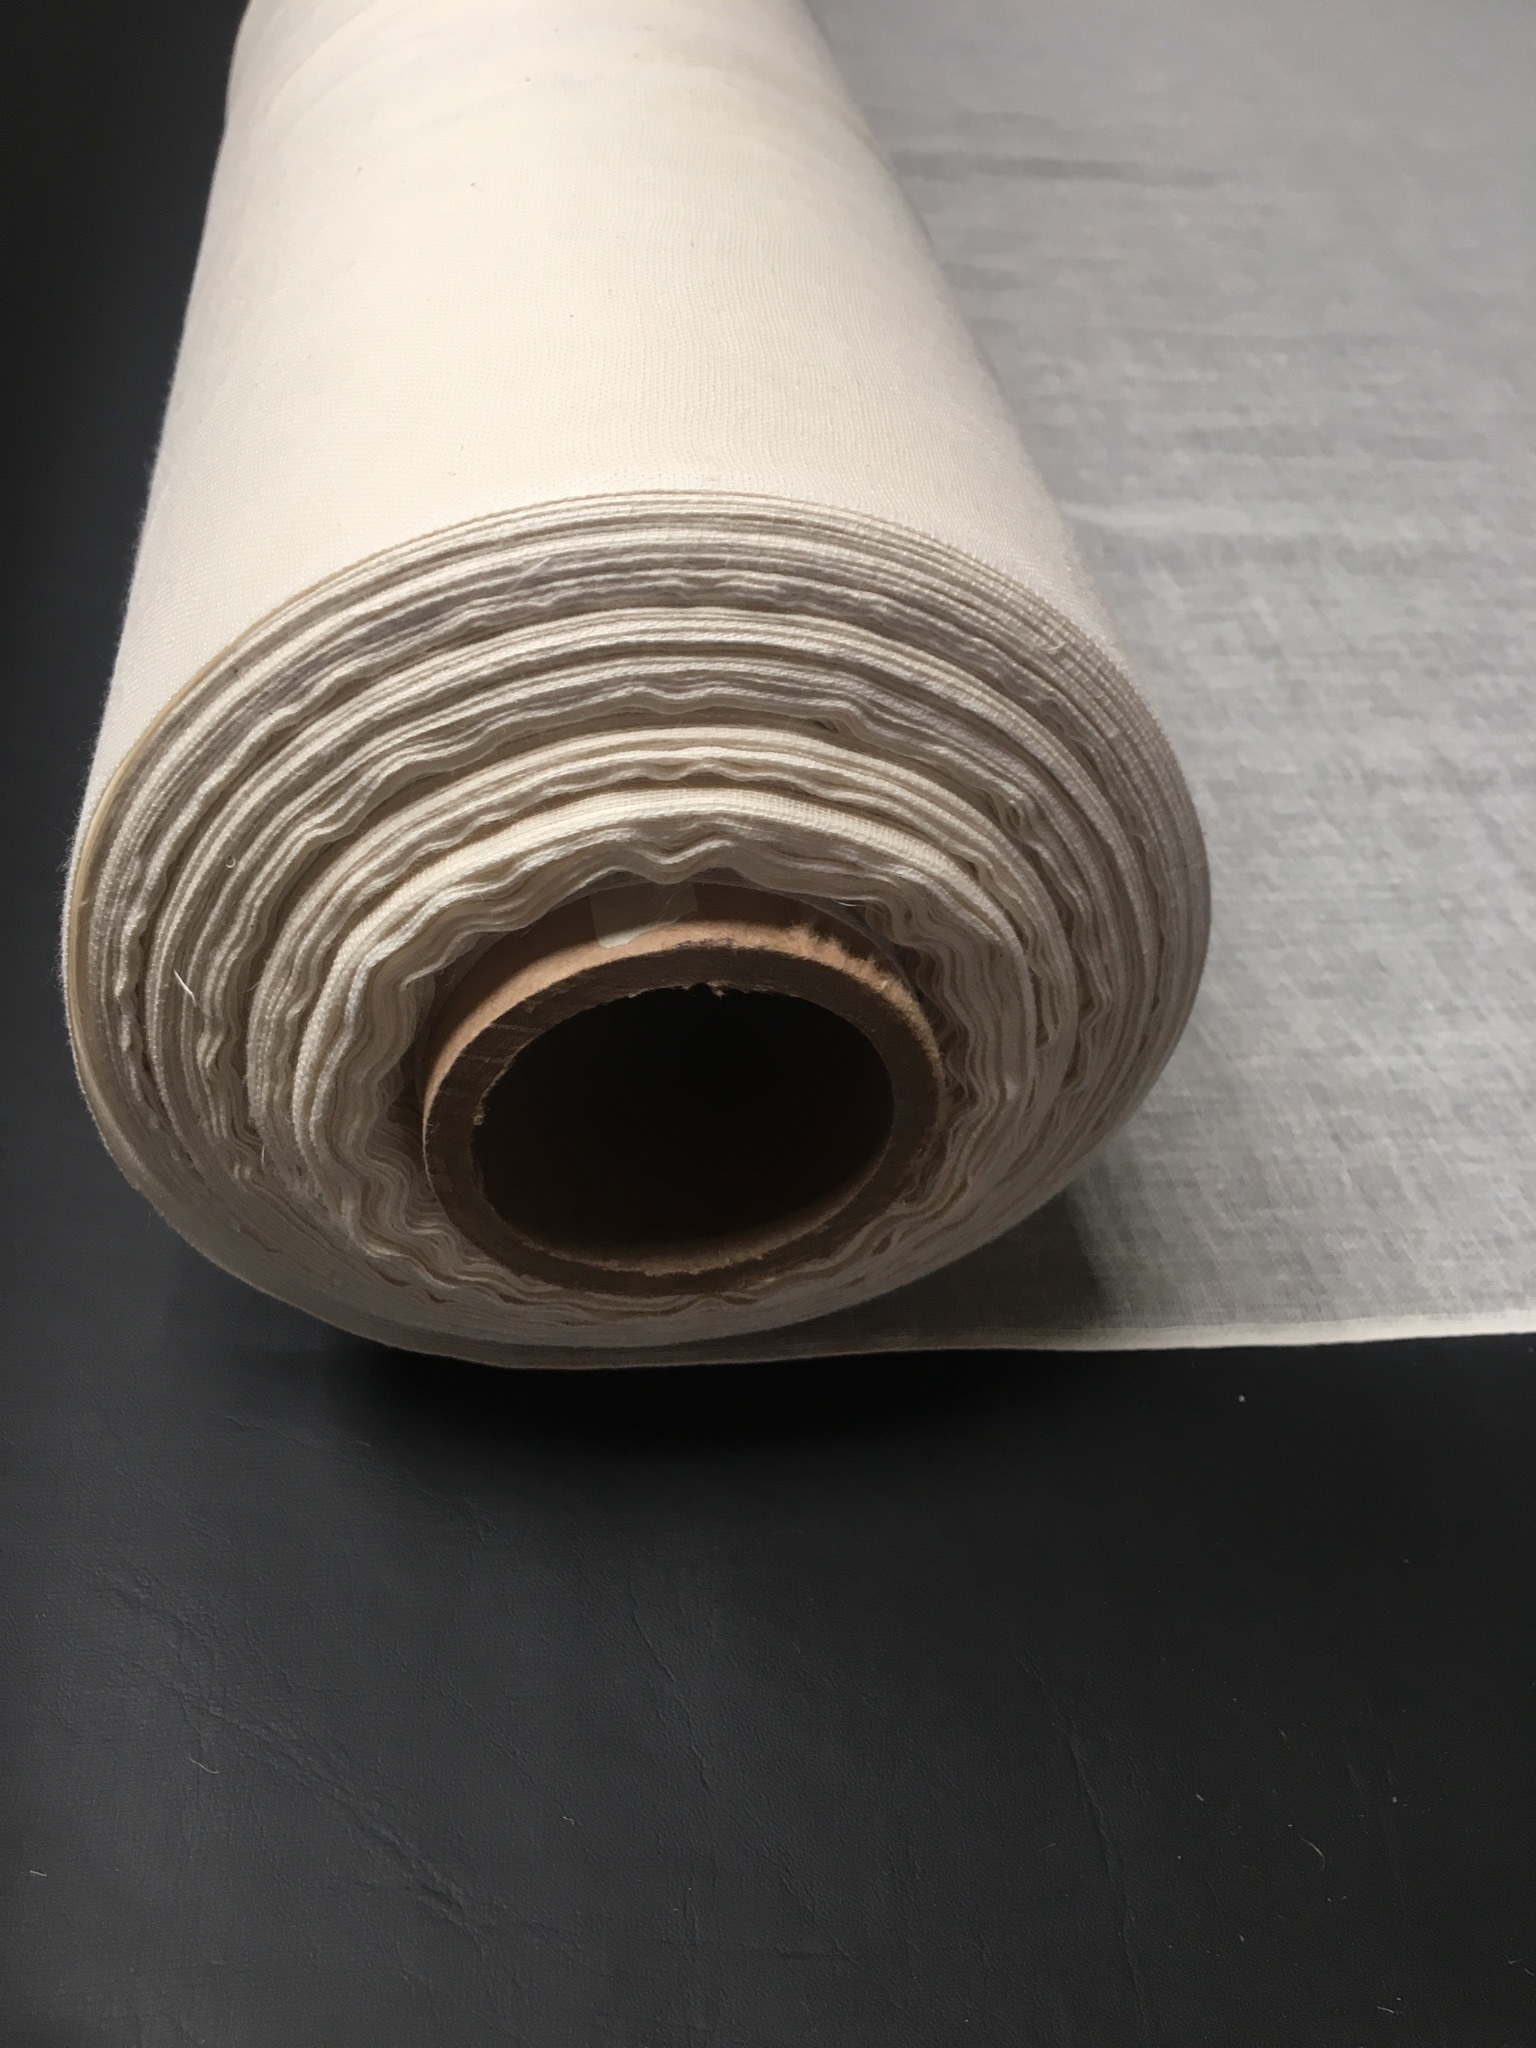 Grade 90 Unbleached Cheesecloth 100 Yard Roll - 64" Wide